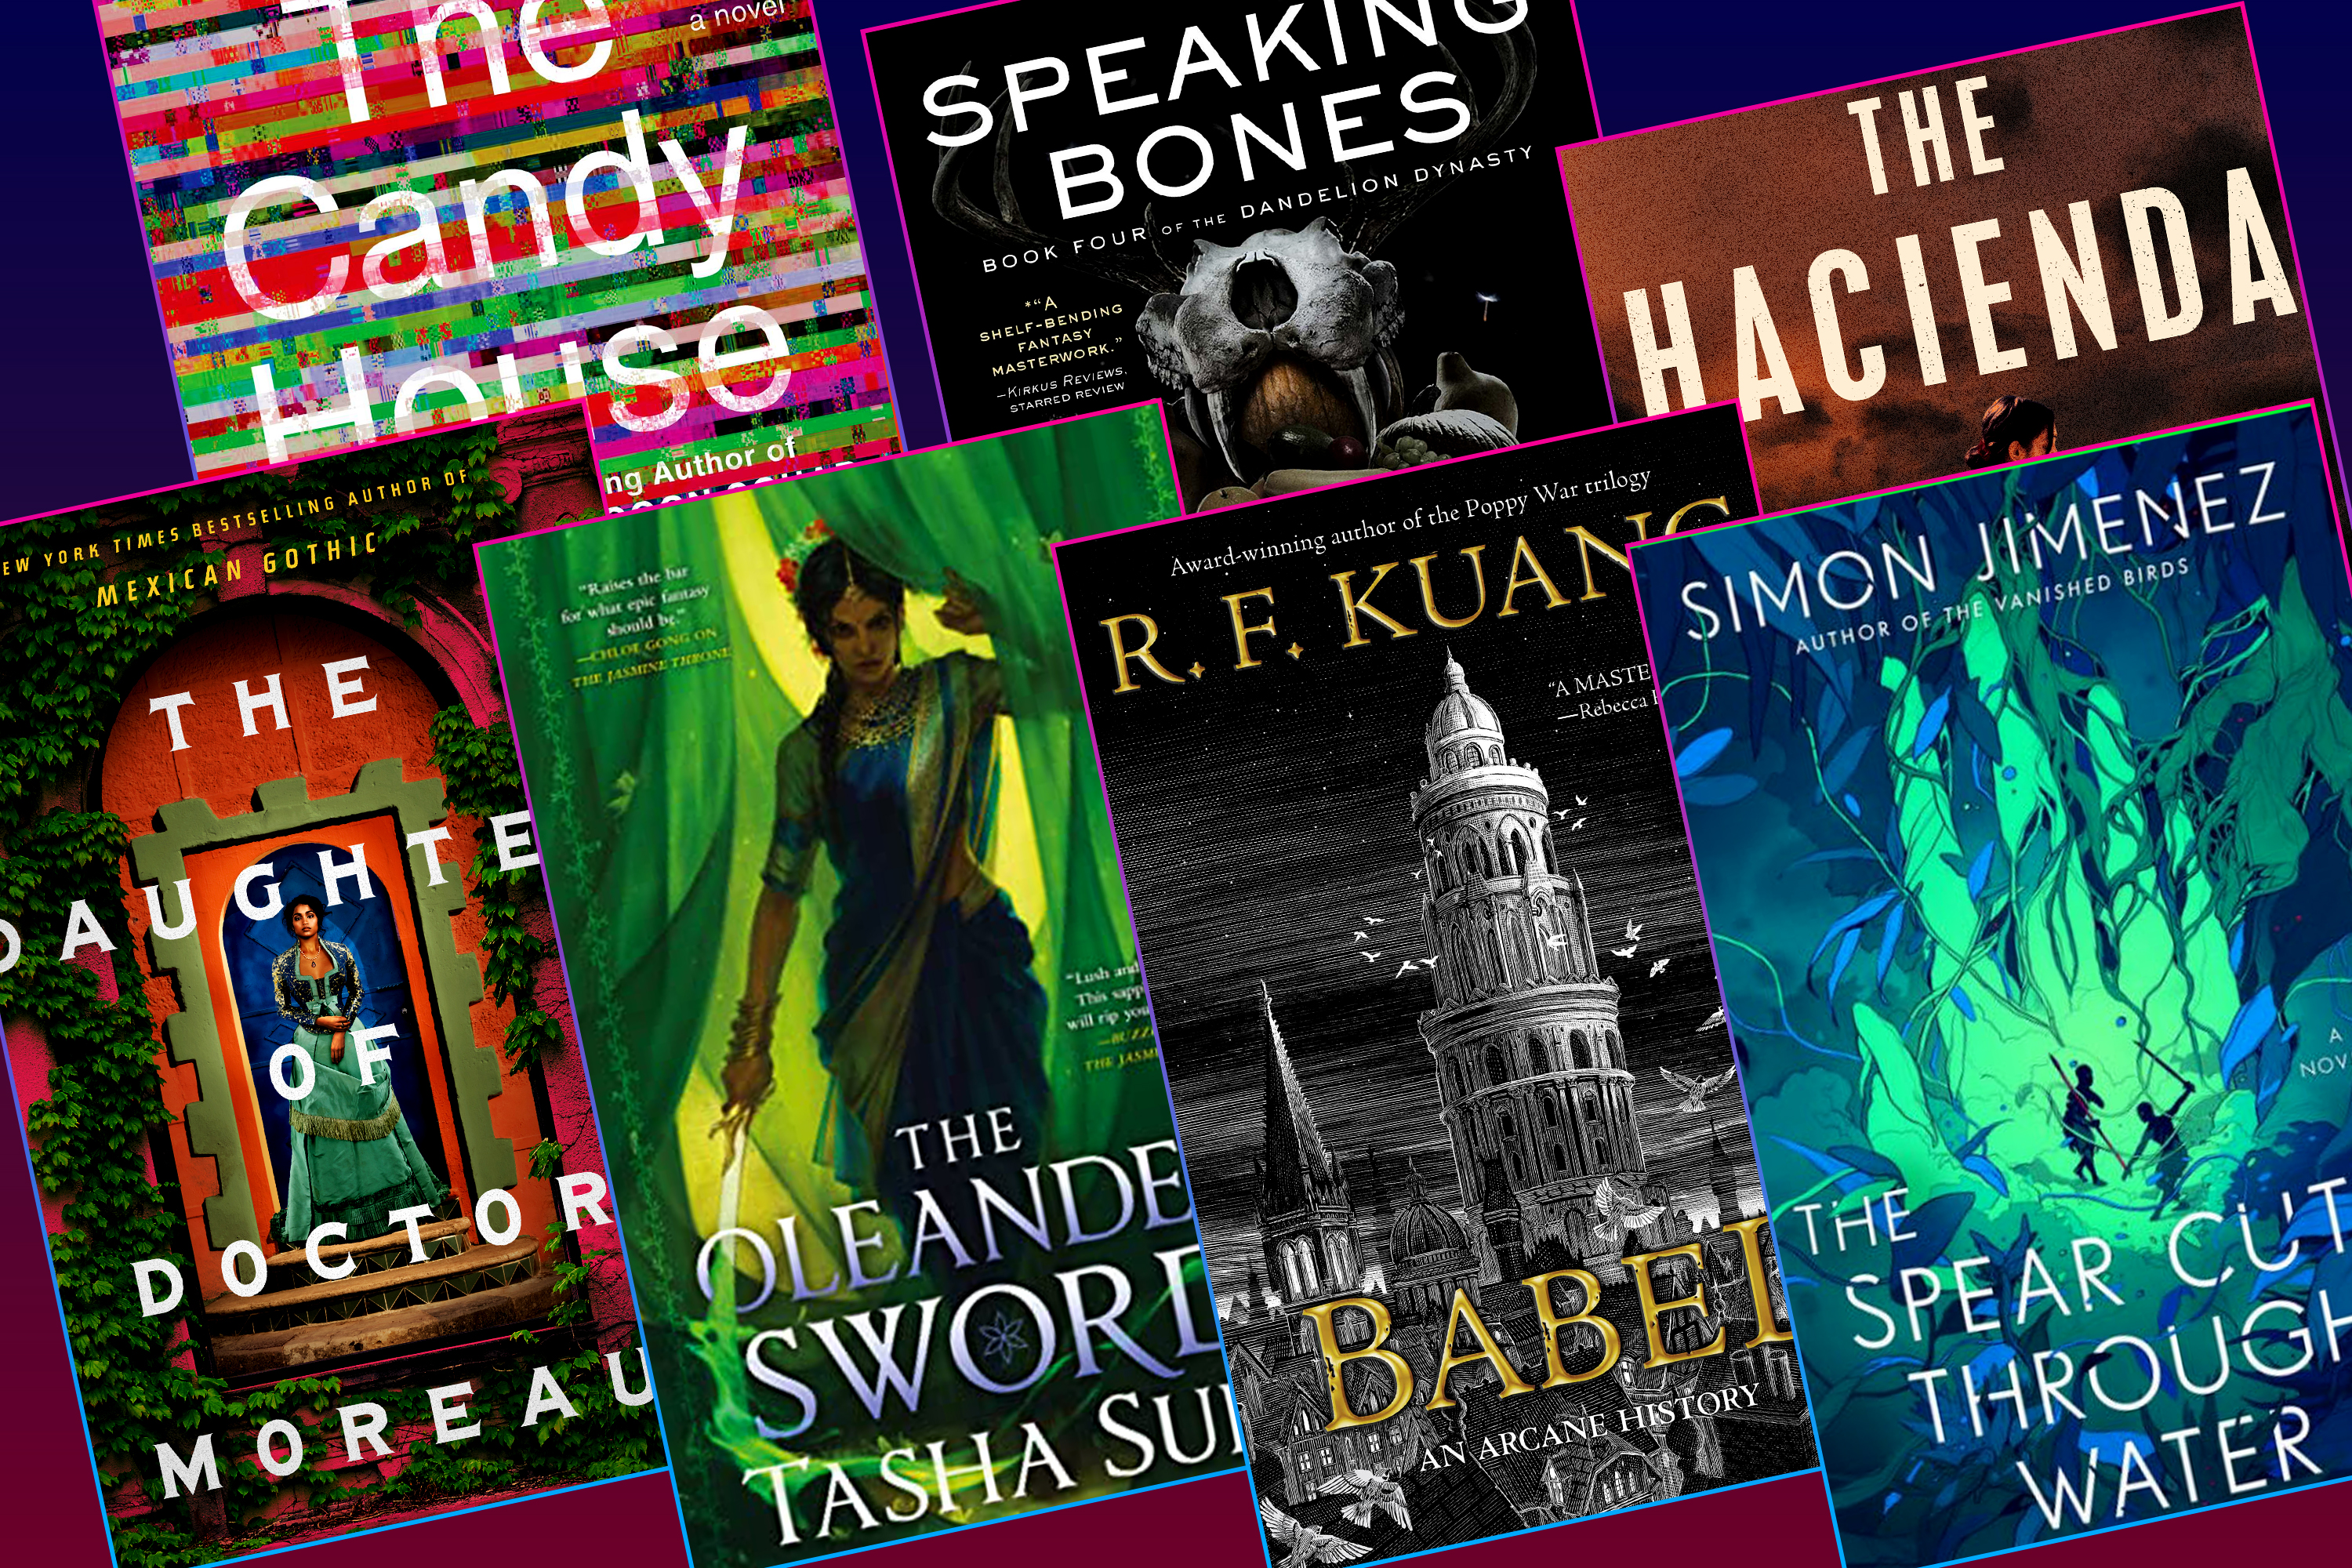 A collage image of titles featured in this list: The Candy House, Speaking Bones, The Hacienda, The Daughter of Doctor Moreau, The Oleander Sword, Babel, and The Spear Cut Through Water.